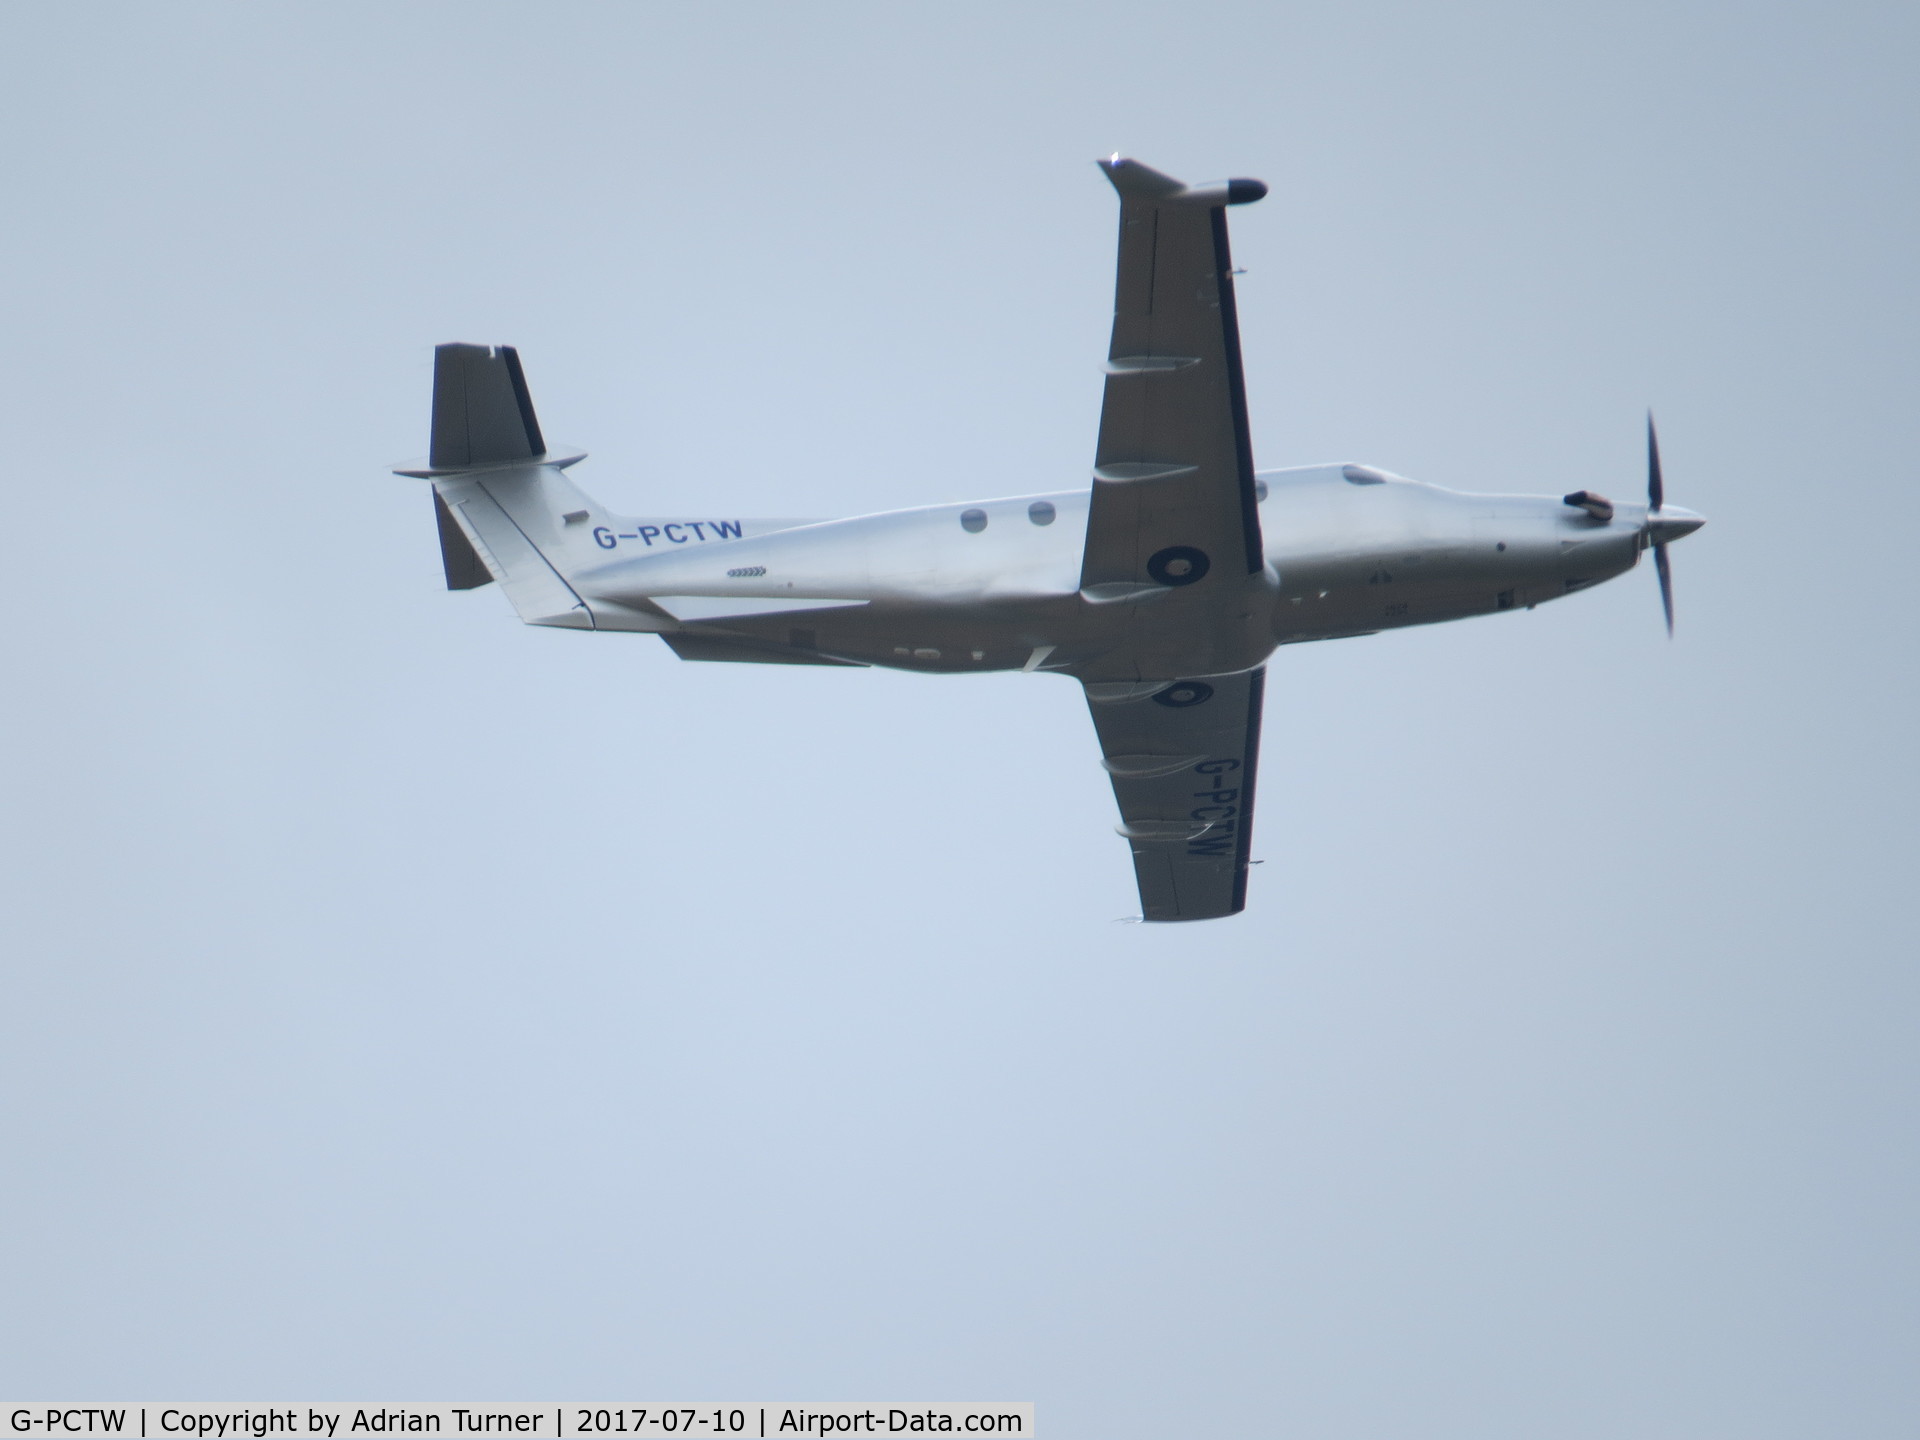 G-PCTW, 2016 Pilatus PC-12/47E C/N 1674, Over the Goring Gap, after take off from RAF Benson